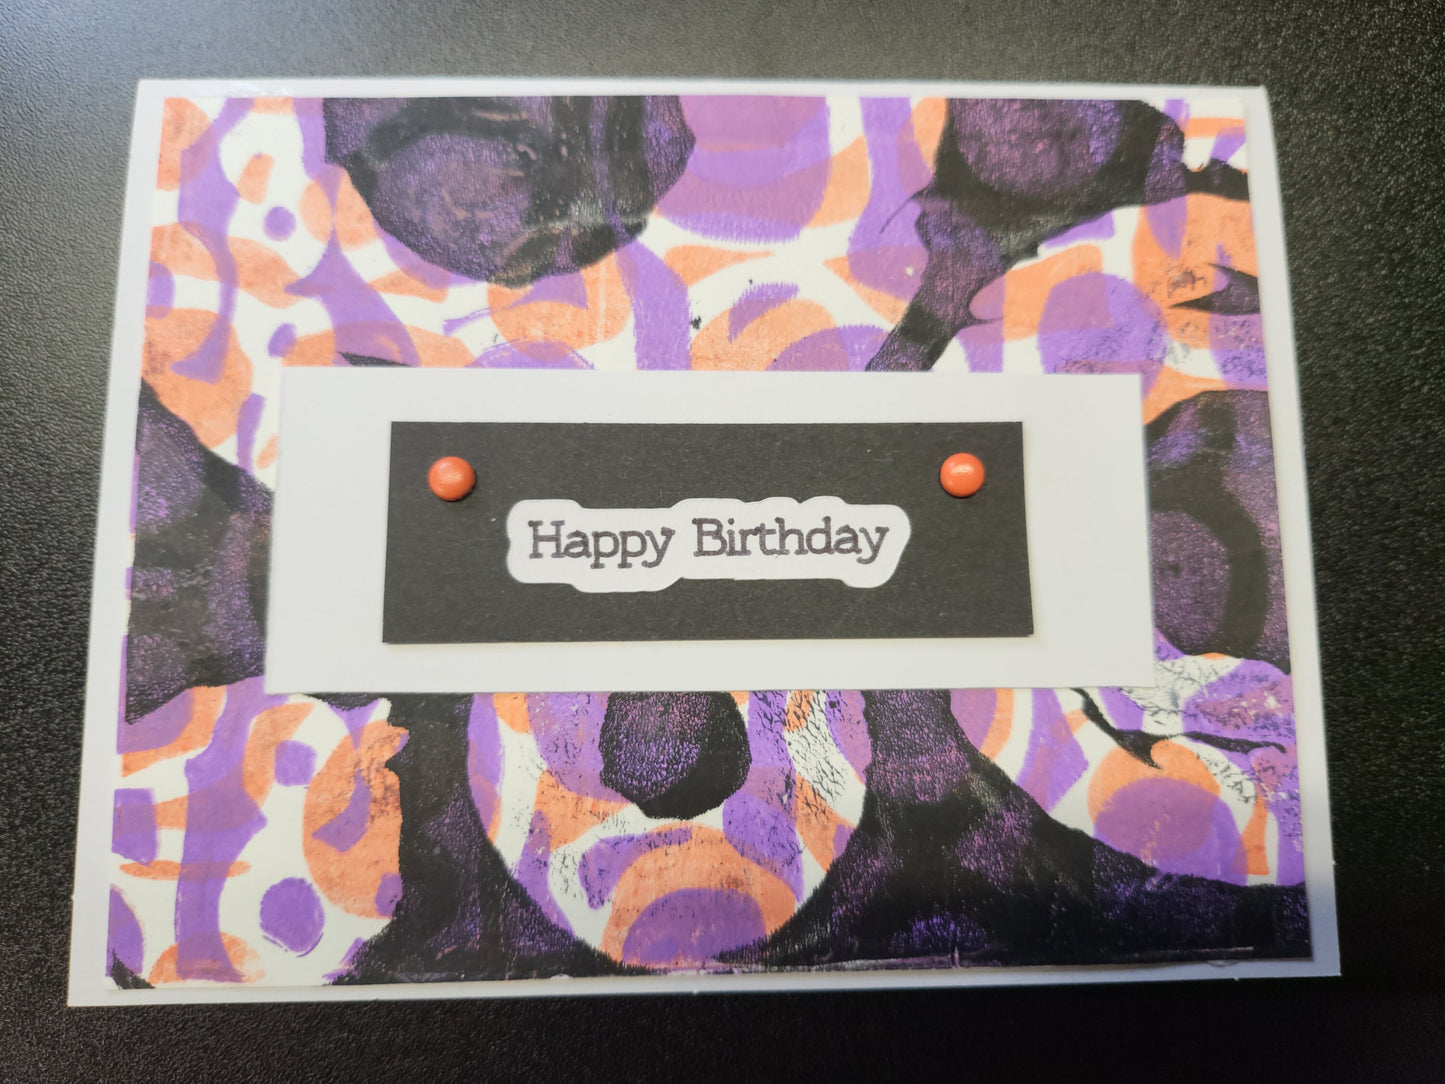 I Tried To Send You Something Sexy For Your Birthday